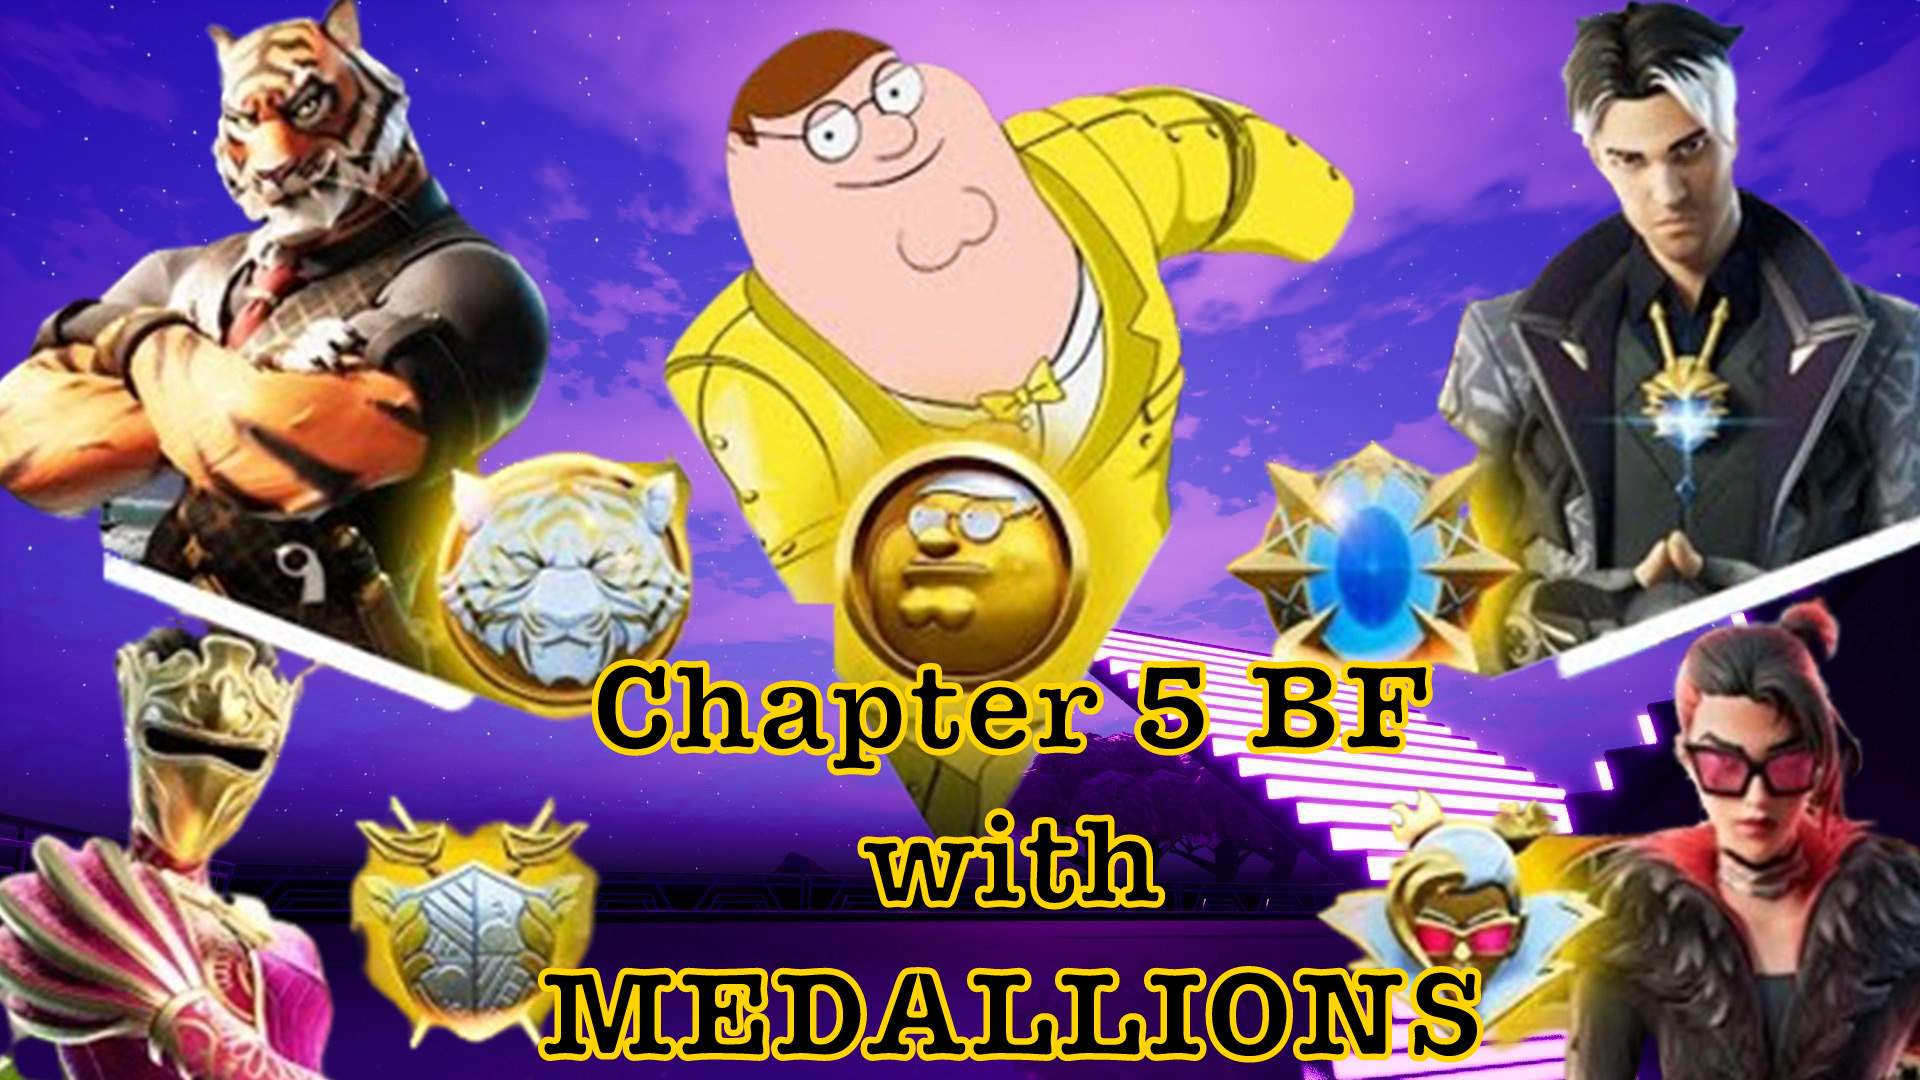 🏗️ CHAPTER 5 BF with MEDALLIONS 🏗️